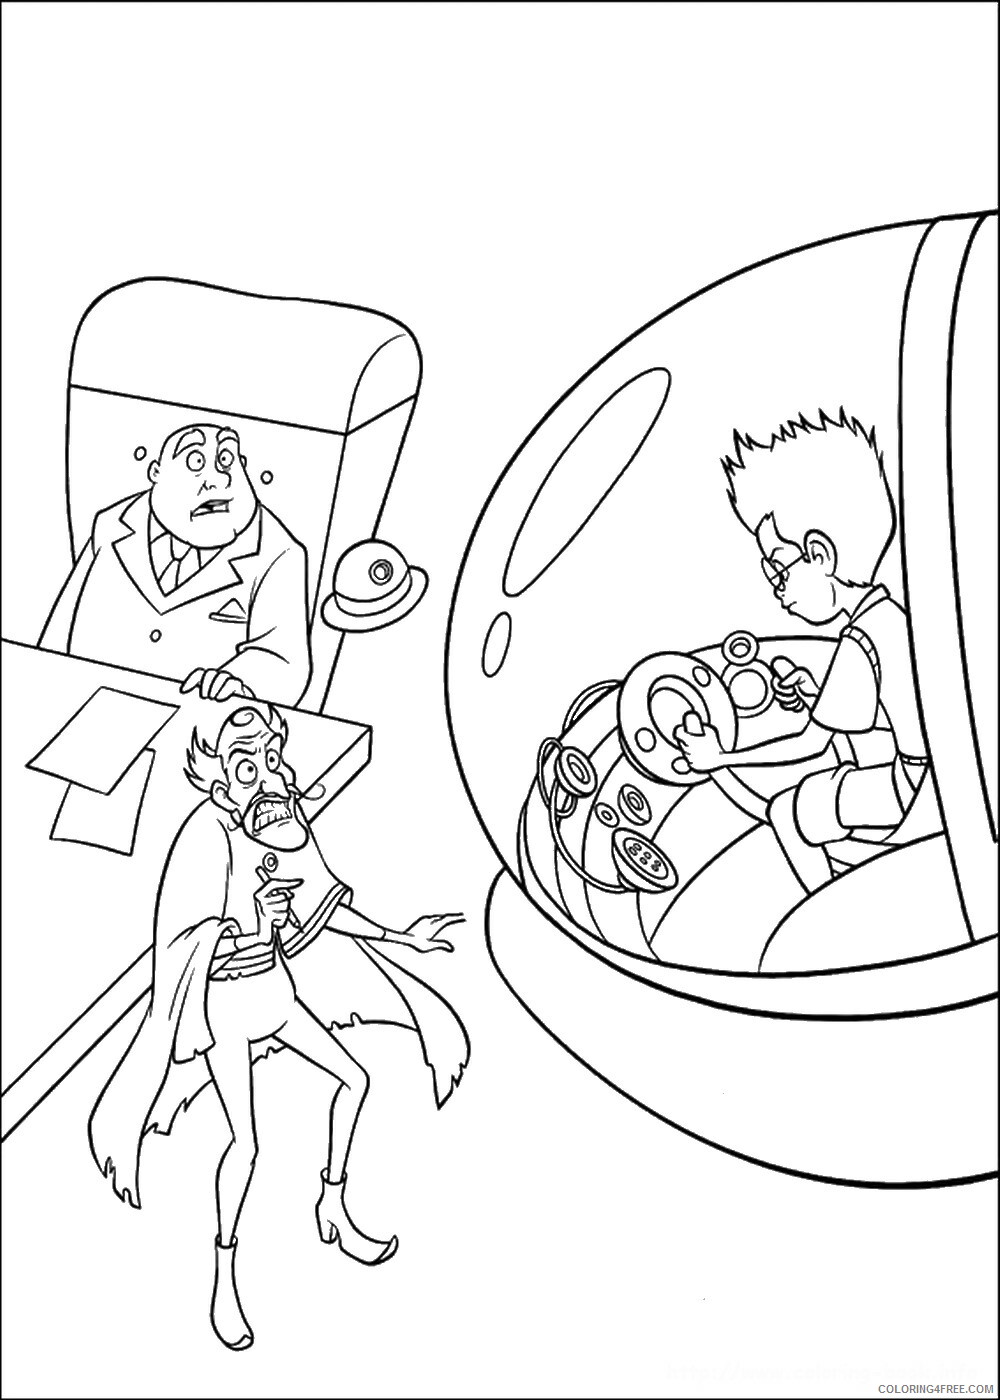 Meet the Robinsons Coloring Pages TV Film meet_the_robinsons Printable 2020 04949 Coloring4free